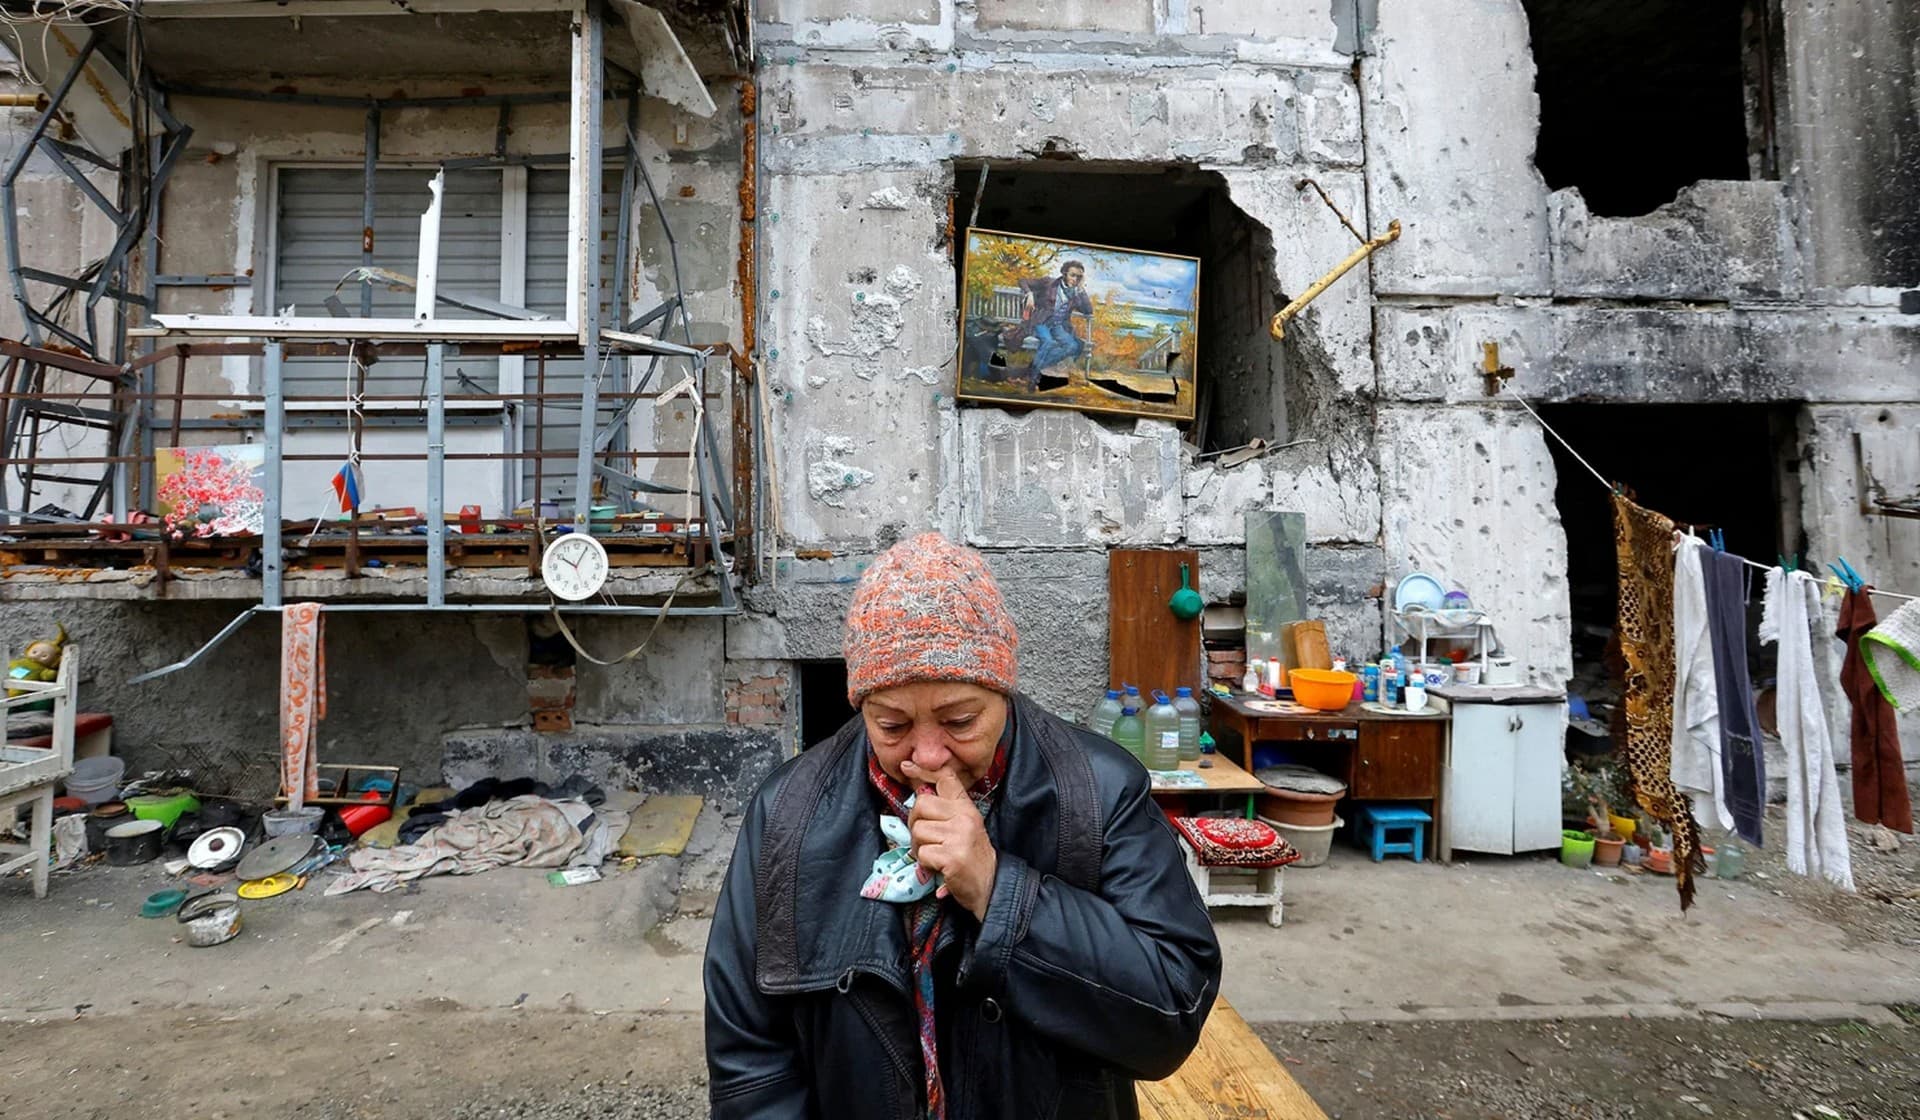 Local resident Galina Shevtsova reacts outside the apartment building where she lives in the basement with her husband Pavel after their flat was destroyed in March in Mariupol